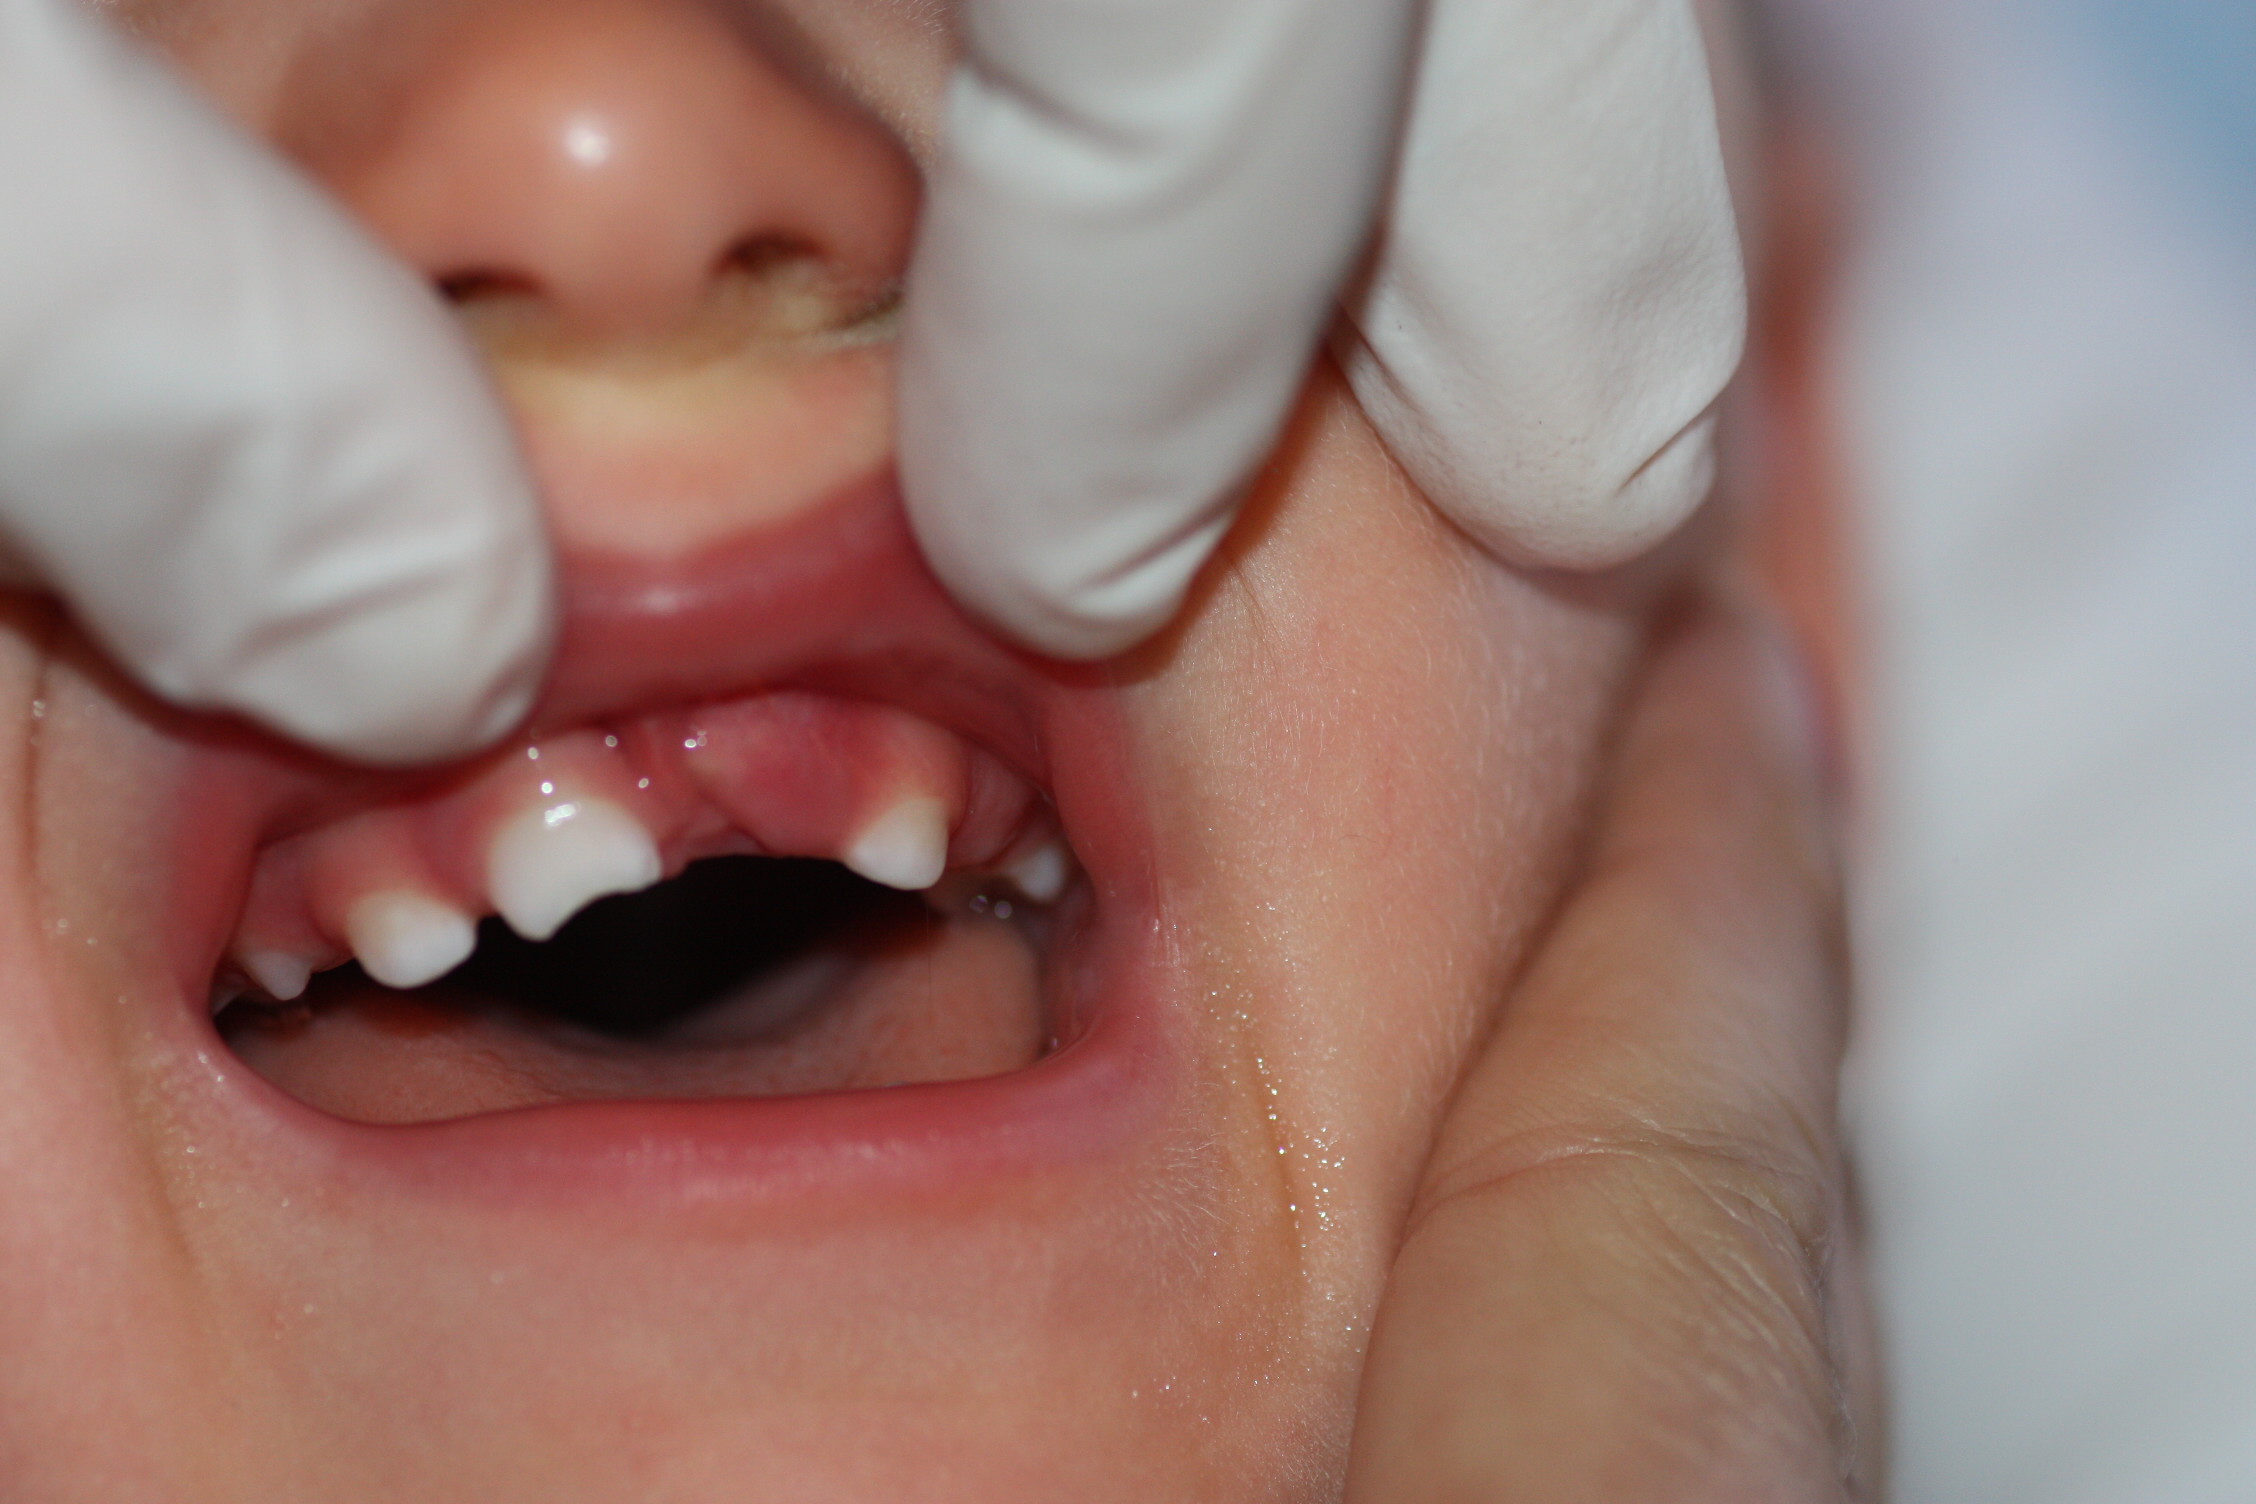 Tooth fracture secondary to trauma: no tooth crown visible